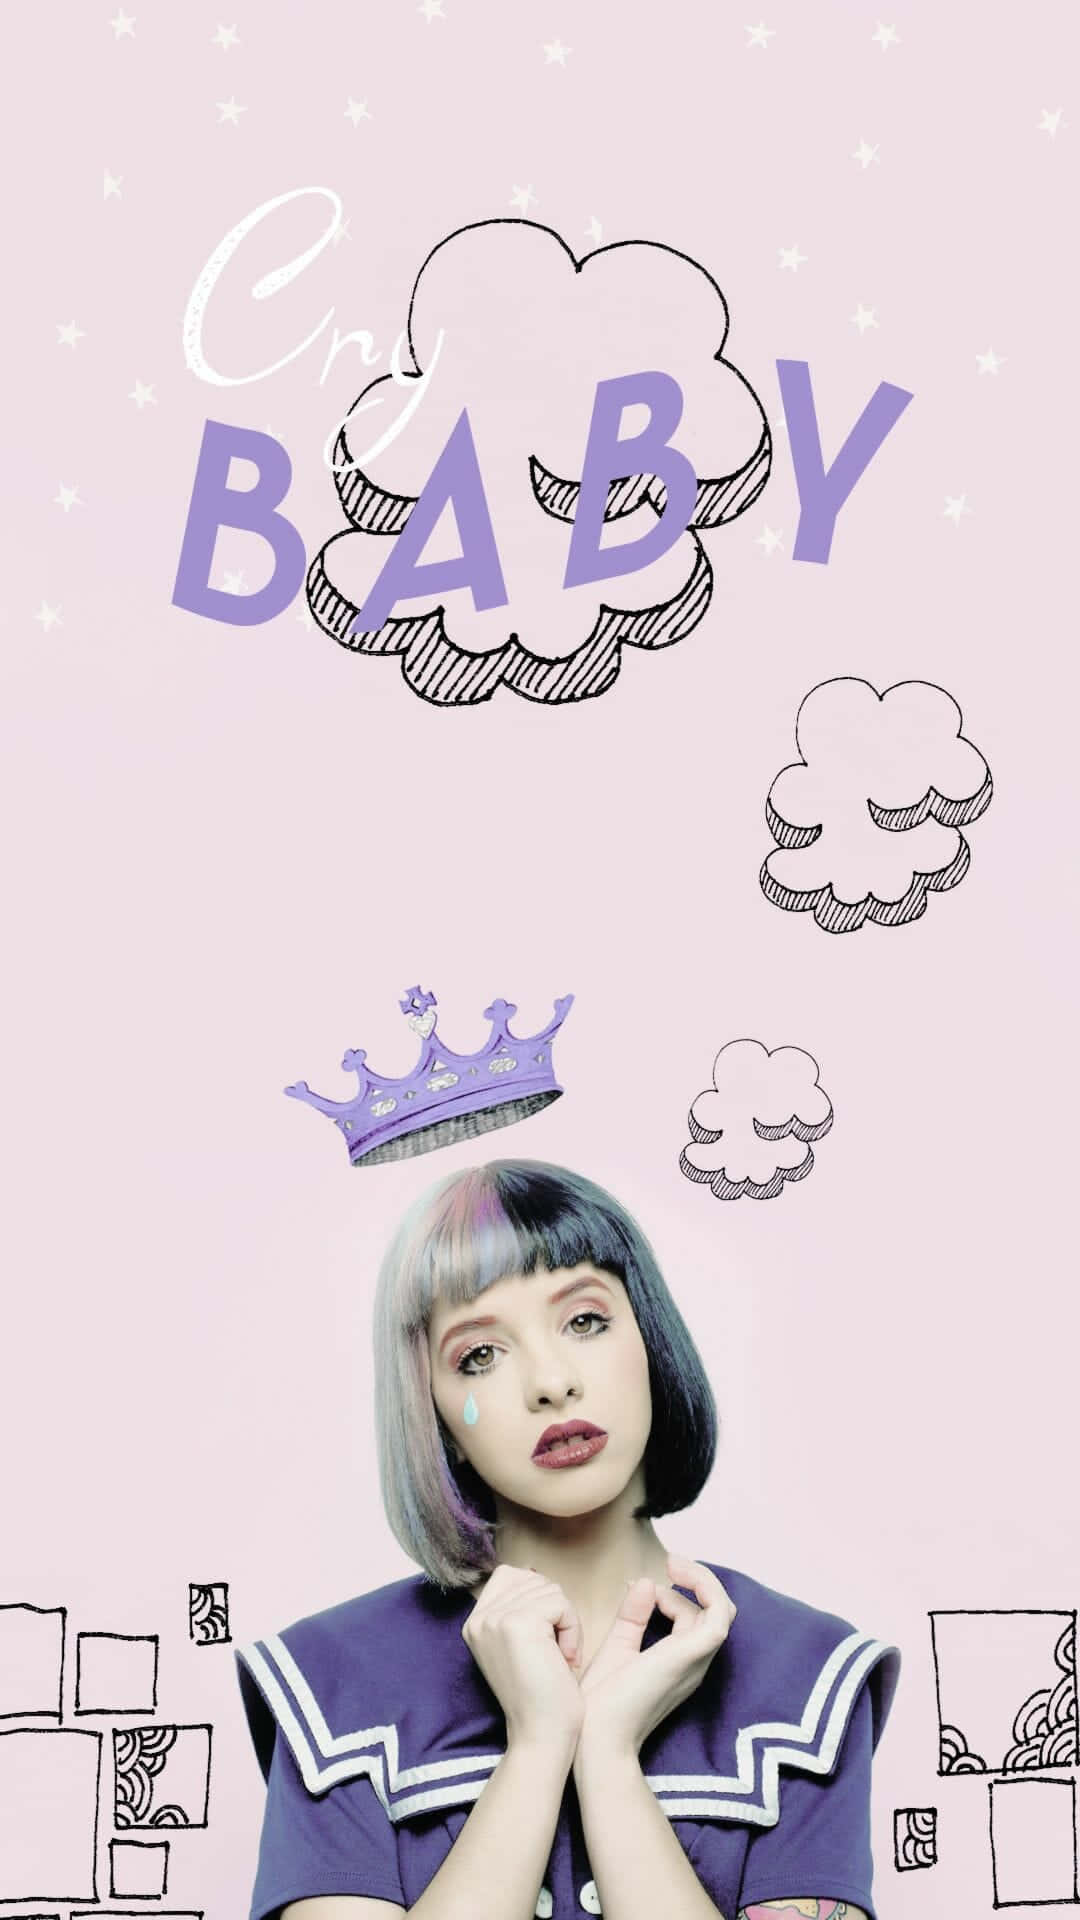 A phone wallpaper of Billie Eilish with a pink background and the words 